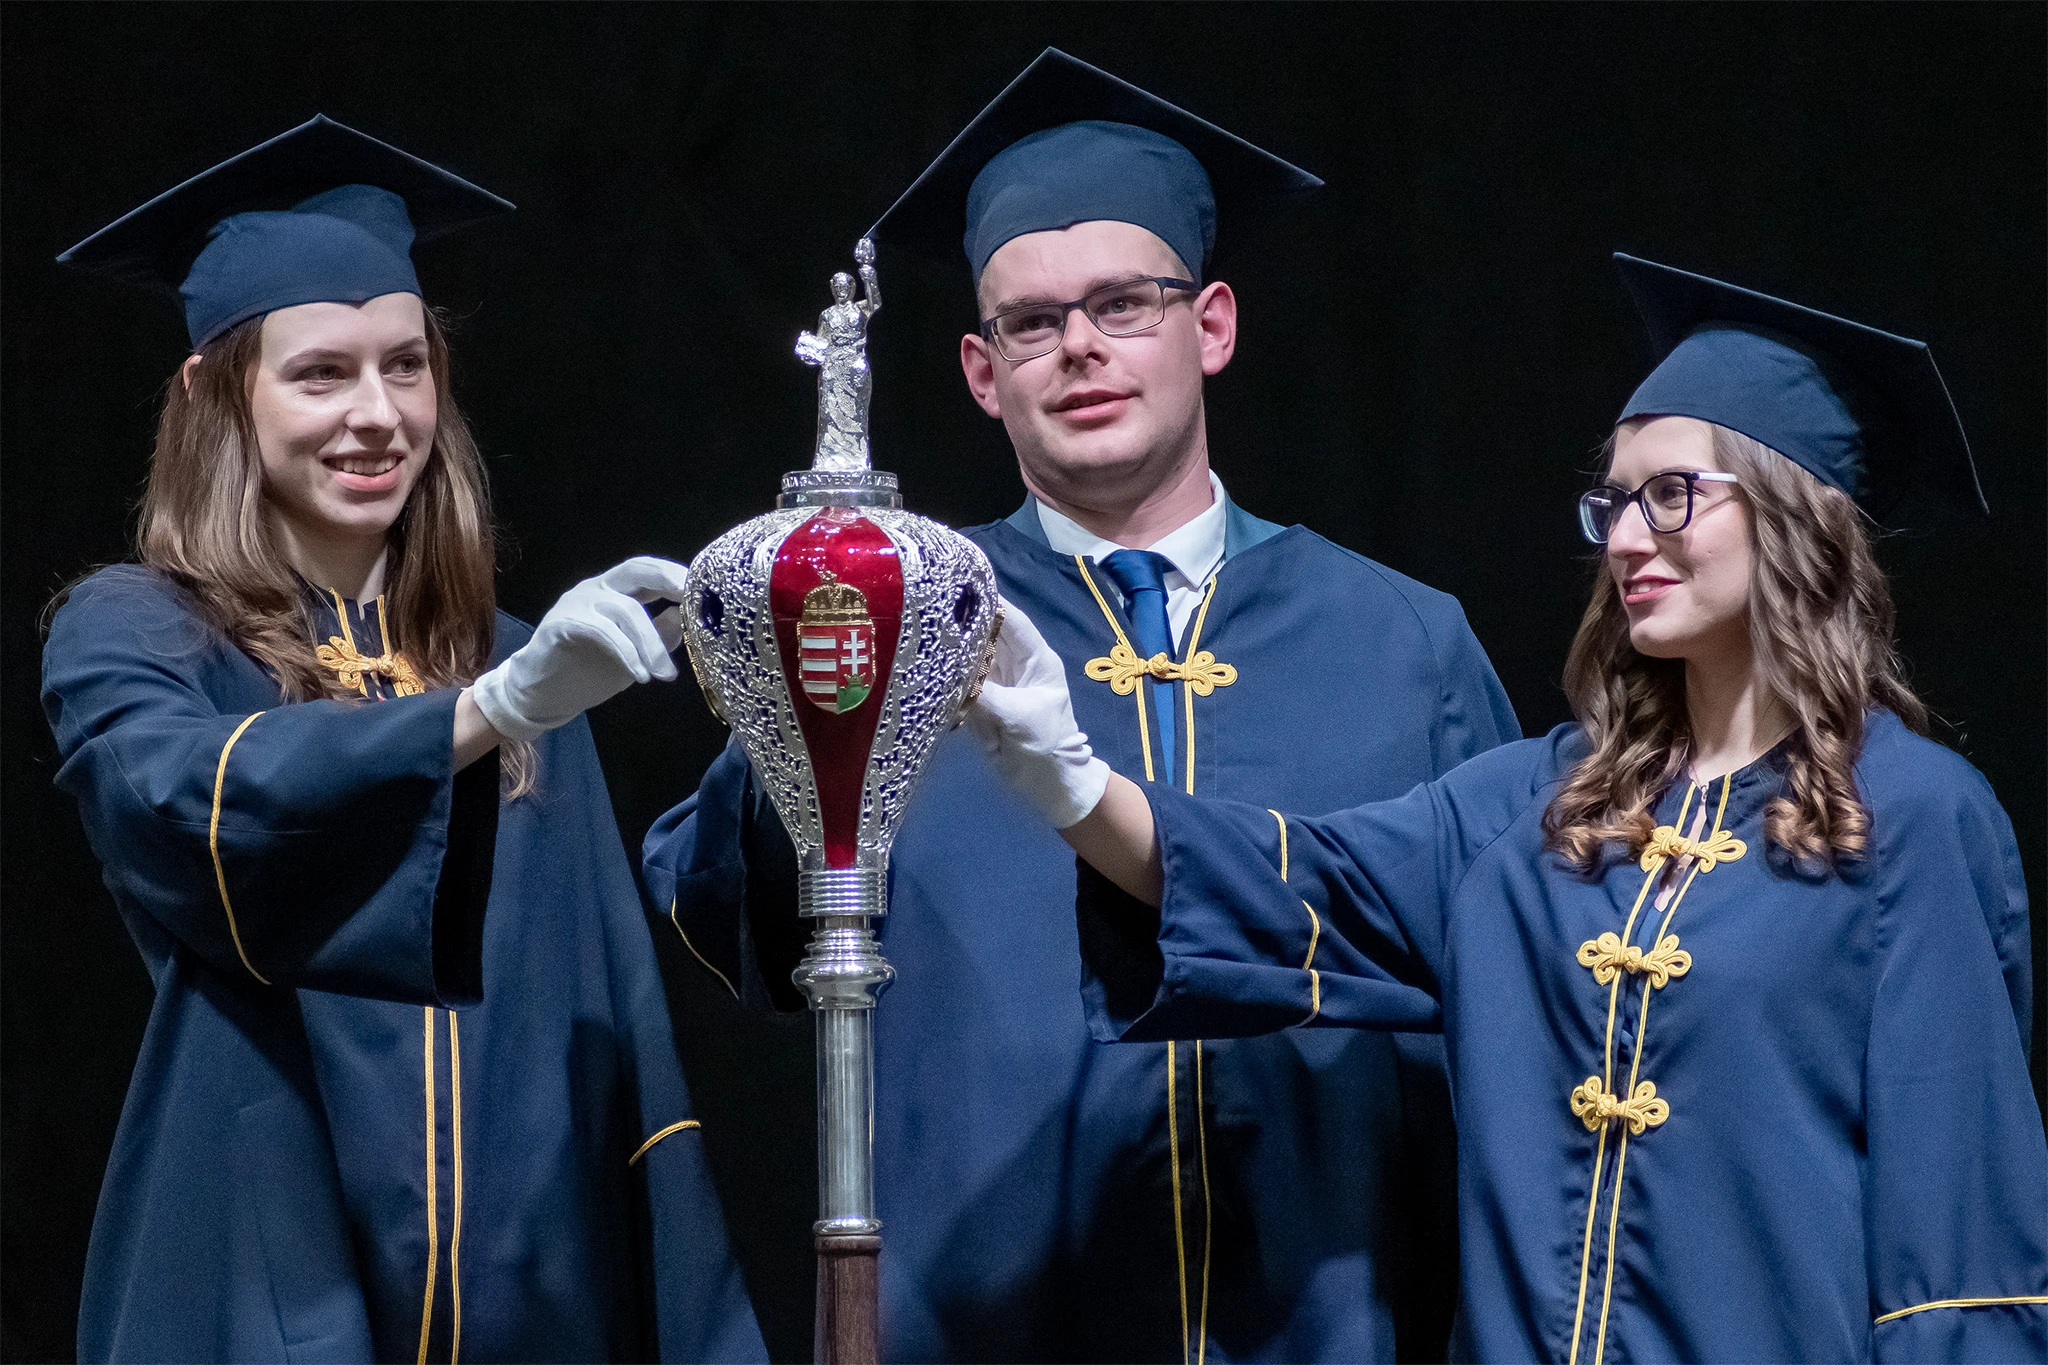 Nearly 600 people received their valuable degrees in one day at Széchenyi István University